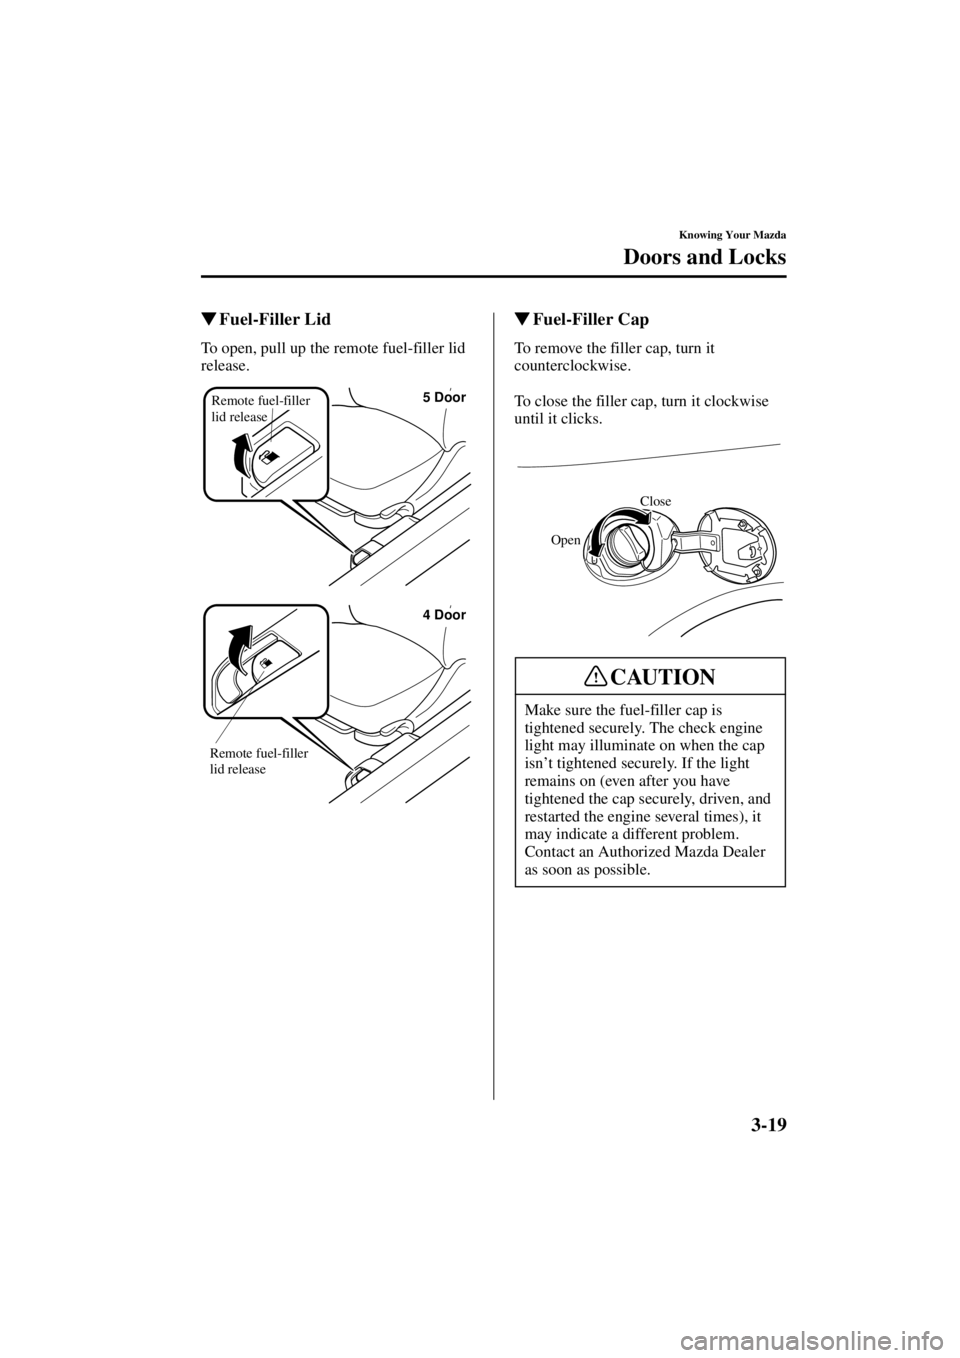 MAZDA MODEL 3 4-DOOR 2004 Owners Guide 3-19
Knowing Your Mazda
Doors and Locks
Form No. 8S18-EA-03I
Fuel-Filler Lid
To open, pull up the remote fuel-filler lid 
release.
 Fuel-Filler Cap
To remove the filler cap, turn it 
counterclockwis